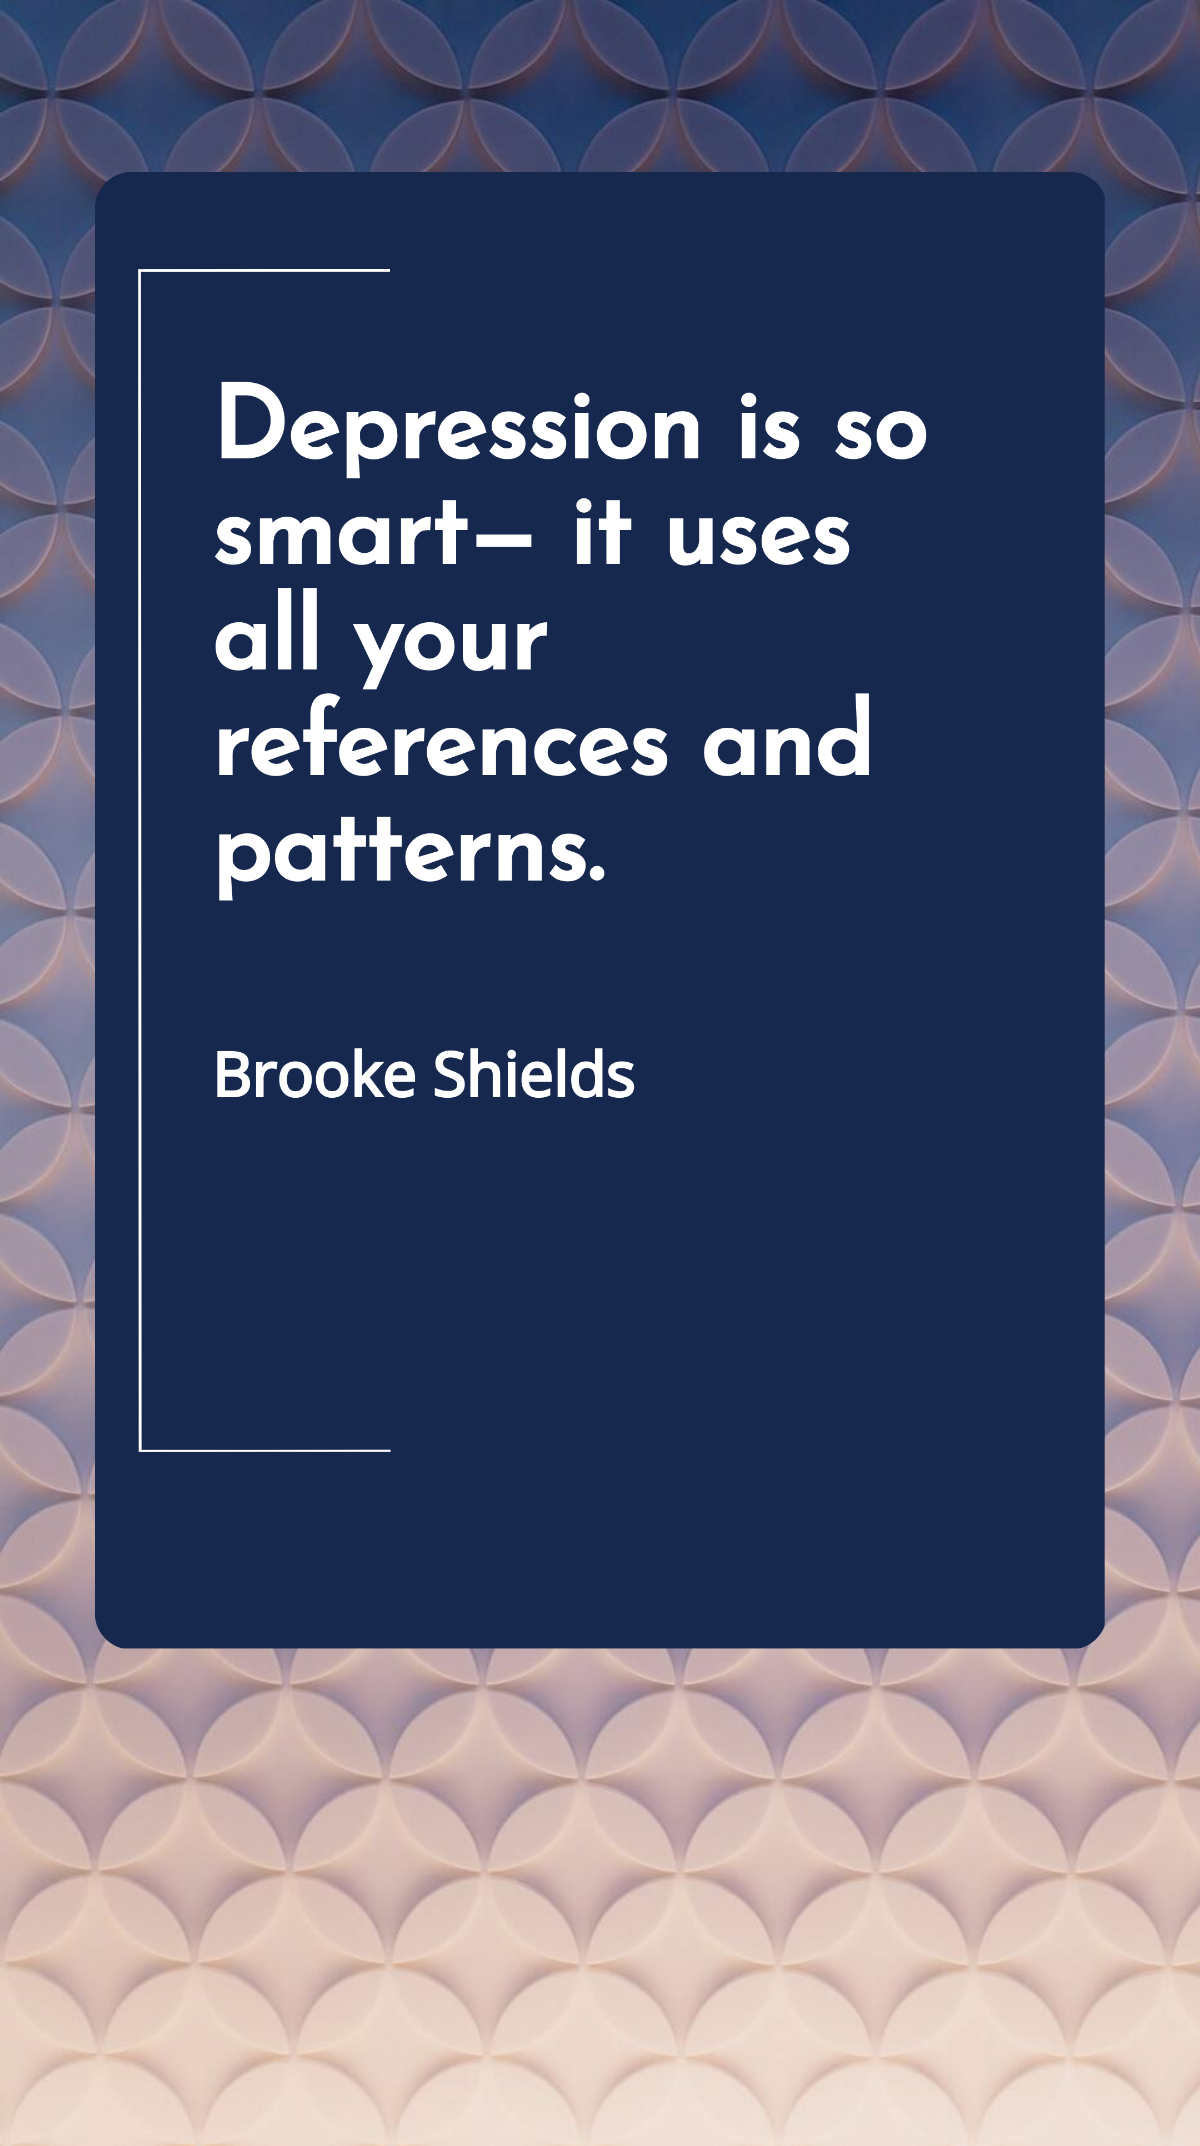 Brooke Shields - Depression is so smart - it uses all your references and patterns. Template